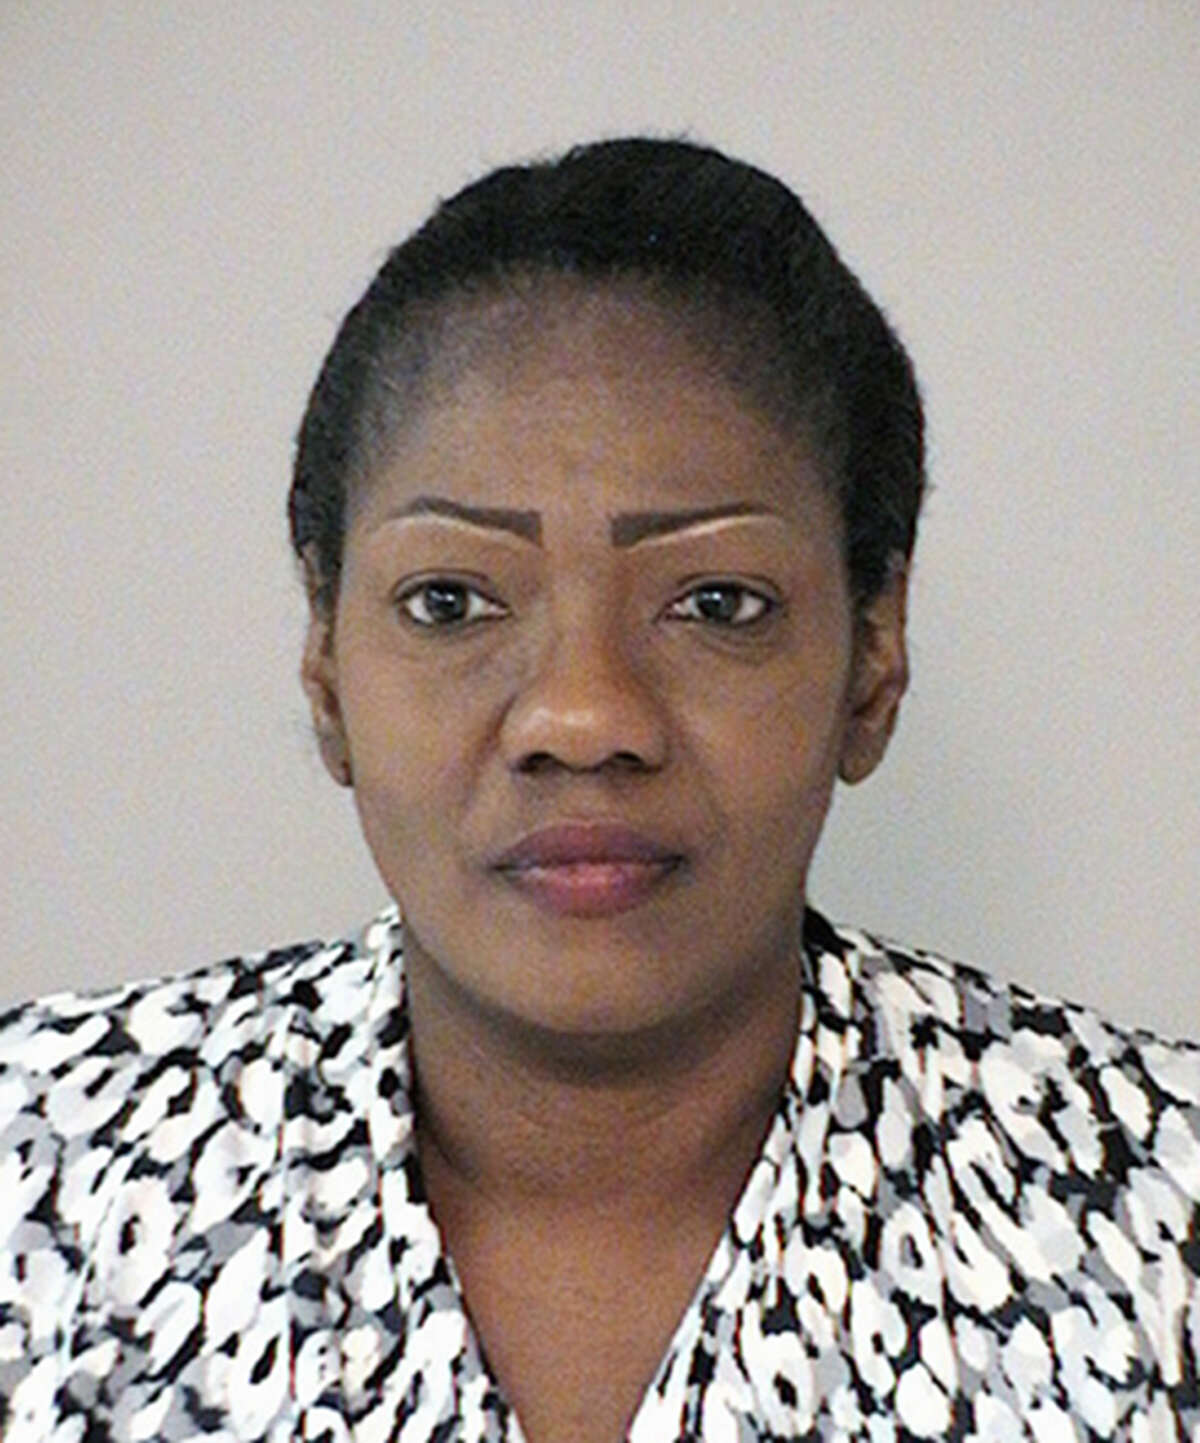 This undated photo provided by the Fort Bend County Sheriff's Office in Richmond, Texas, shows Paula Sinclair, who was charged Tuesday, Dec. 6, 2016, with injury to a child and aggravated kidnapping. A sheriff says seven special-needs teenagers aged 13 to 16 years old were removed Nov. 23 from "deplorable" conditions at the Houston-area home where they were locked for long periods in a closet by Sinclair, their adoptive mother. (Fort Bend County Sheriff's Office via AP)